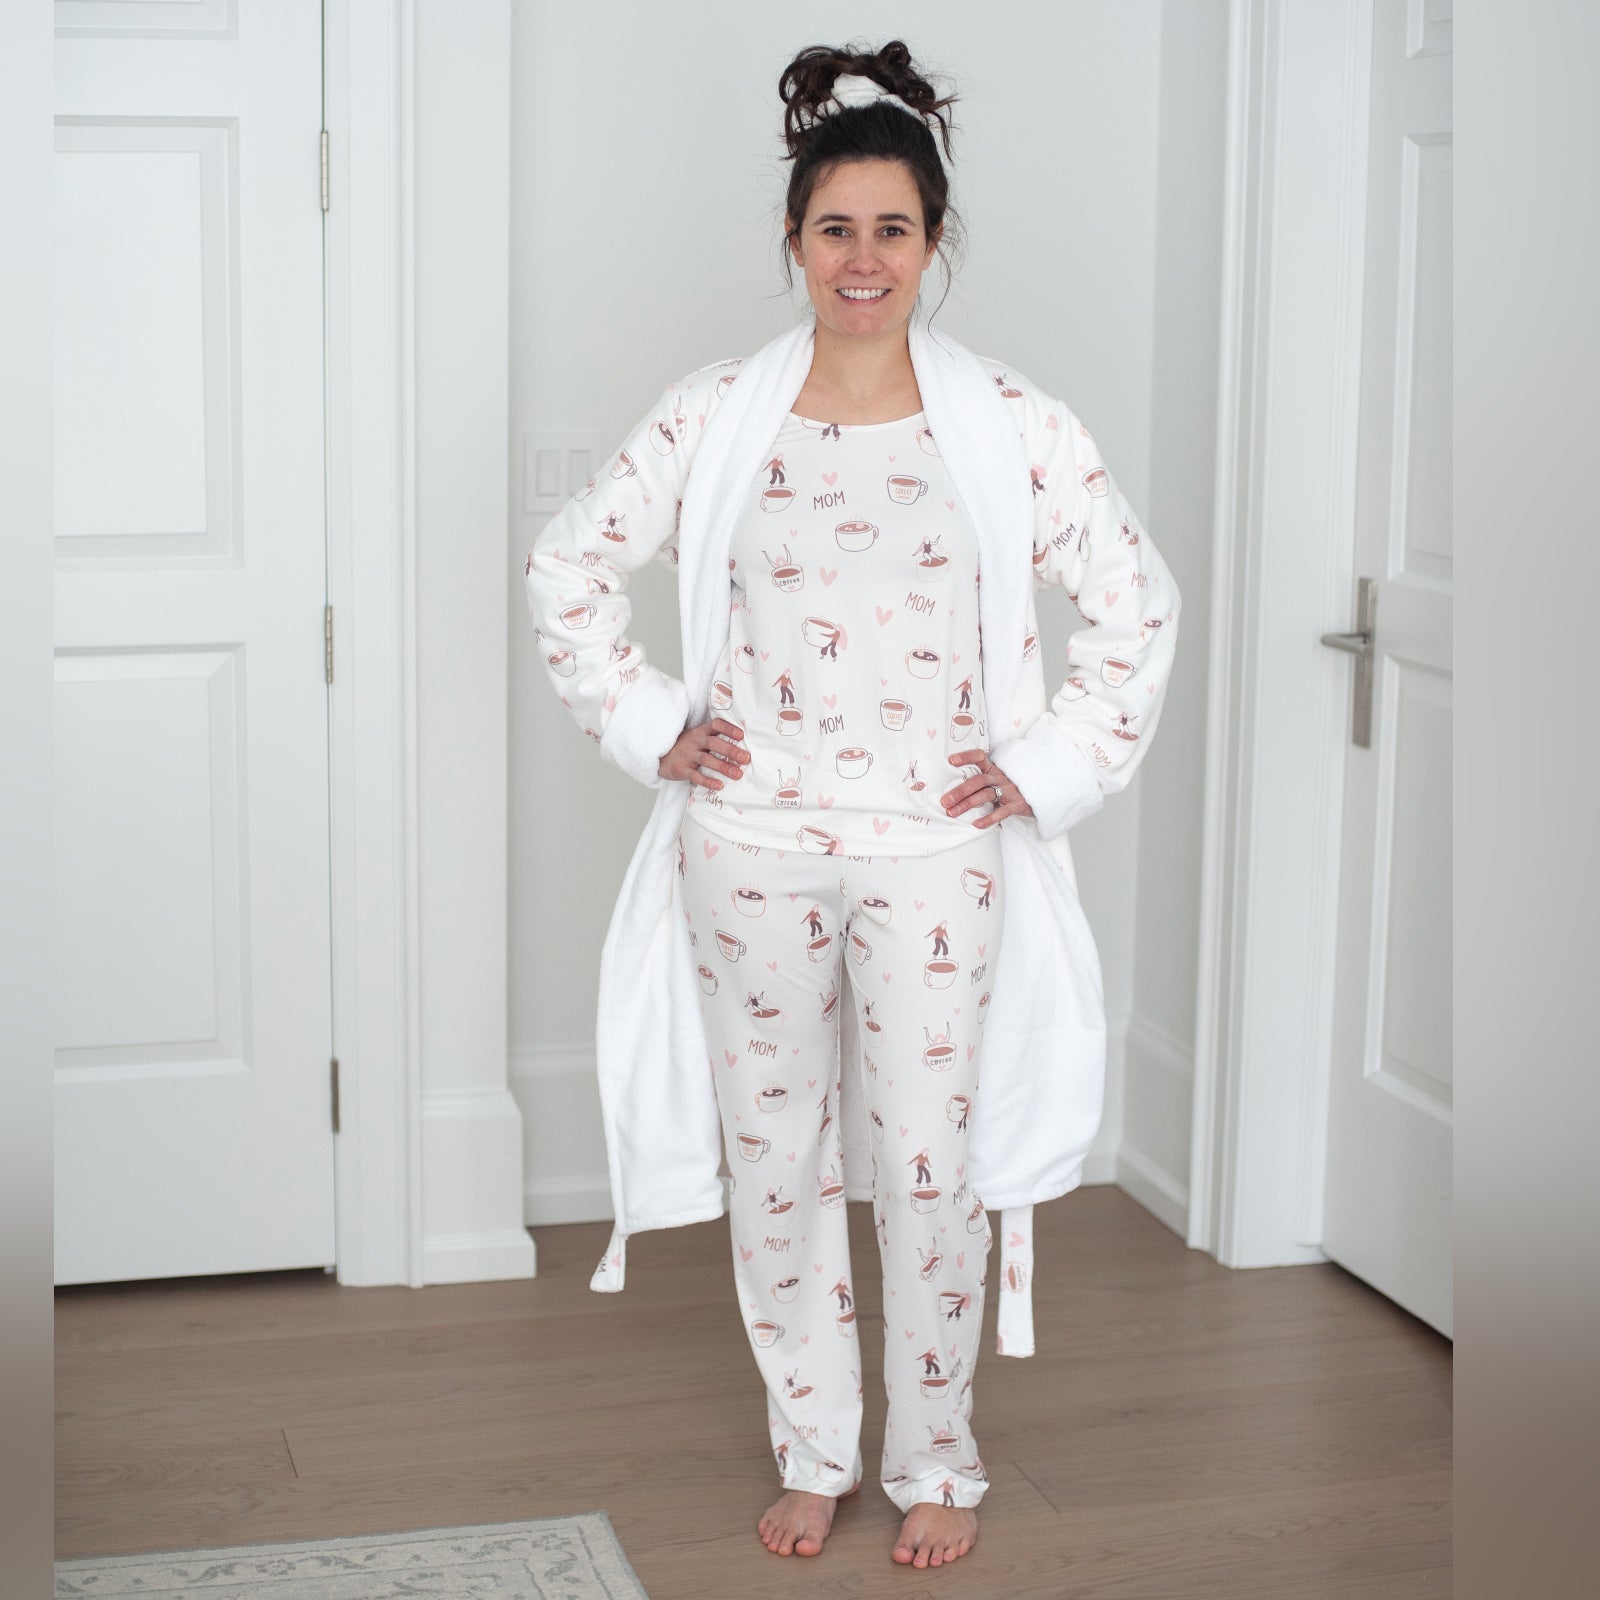 Personalized Woman's Terry Robe